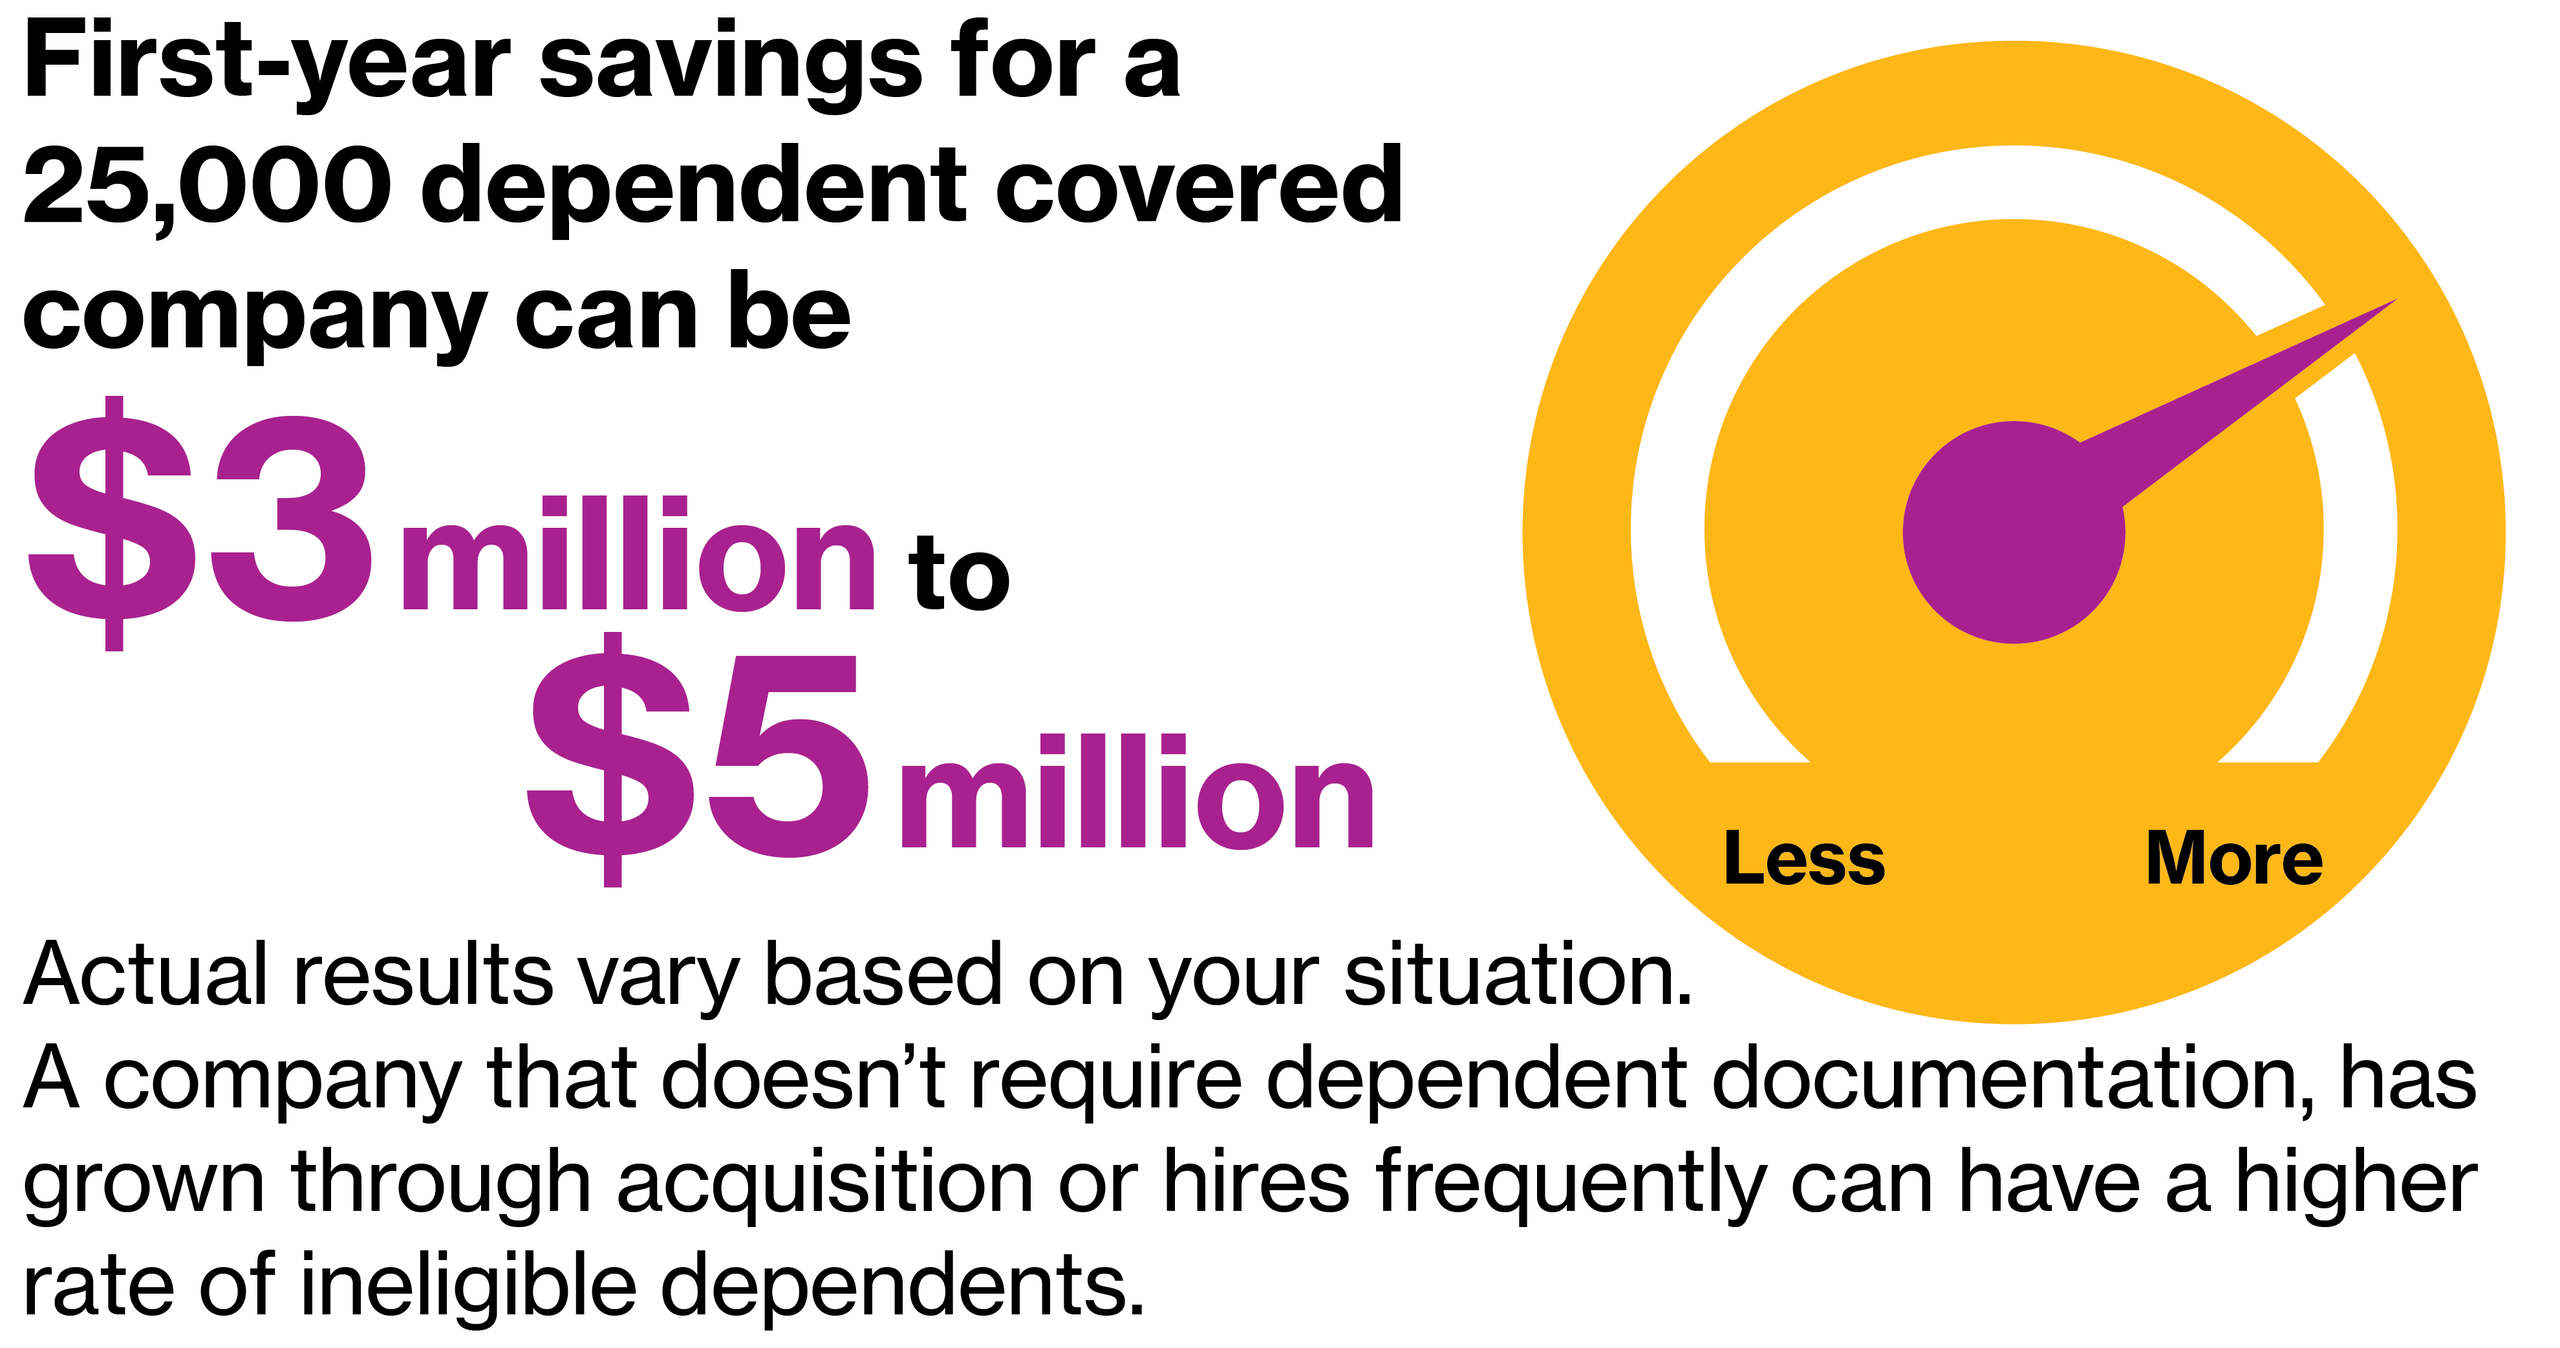 First-year savings for a 25,000 dependent covered company can be $3 million to $7 million